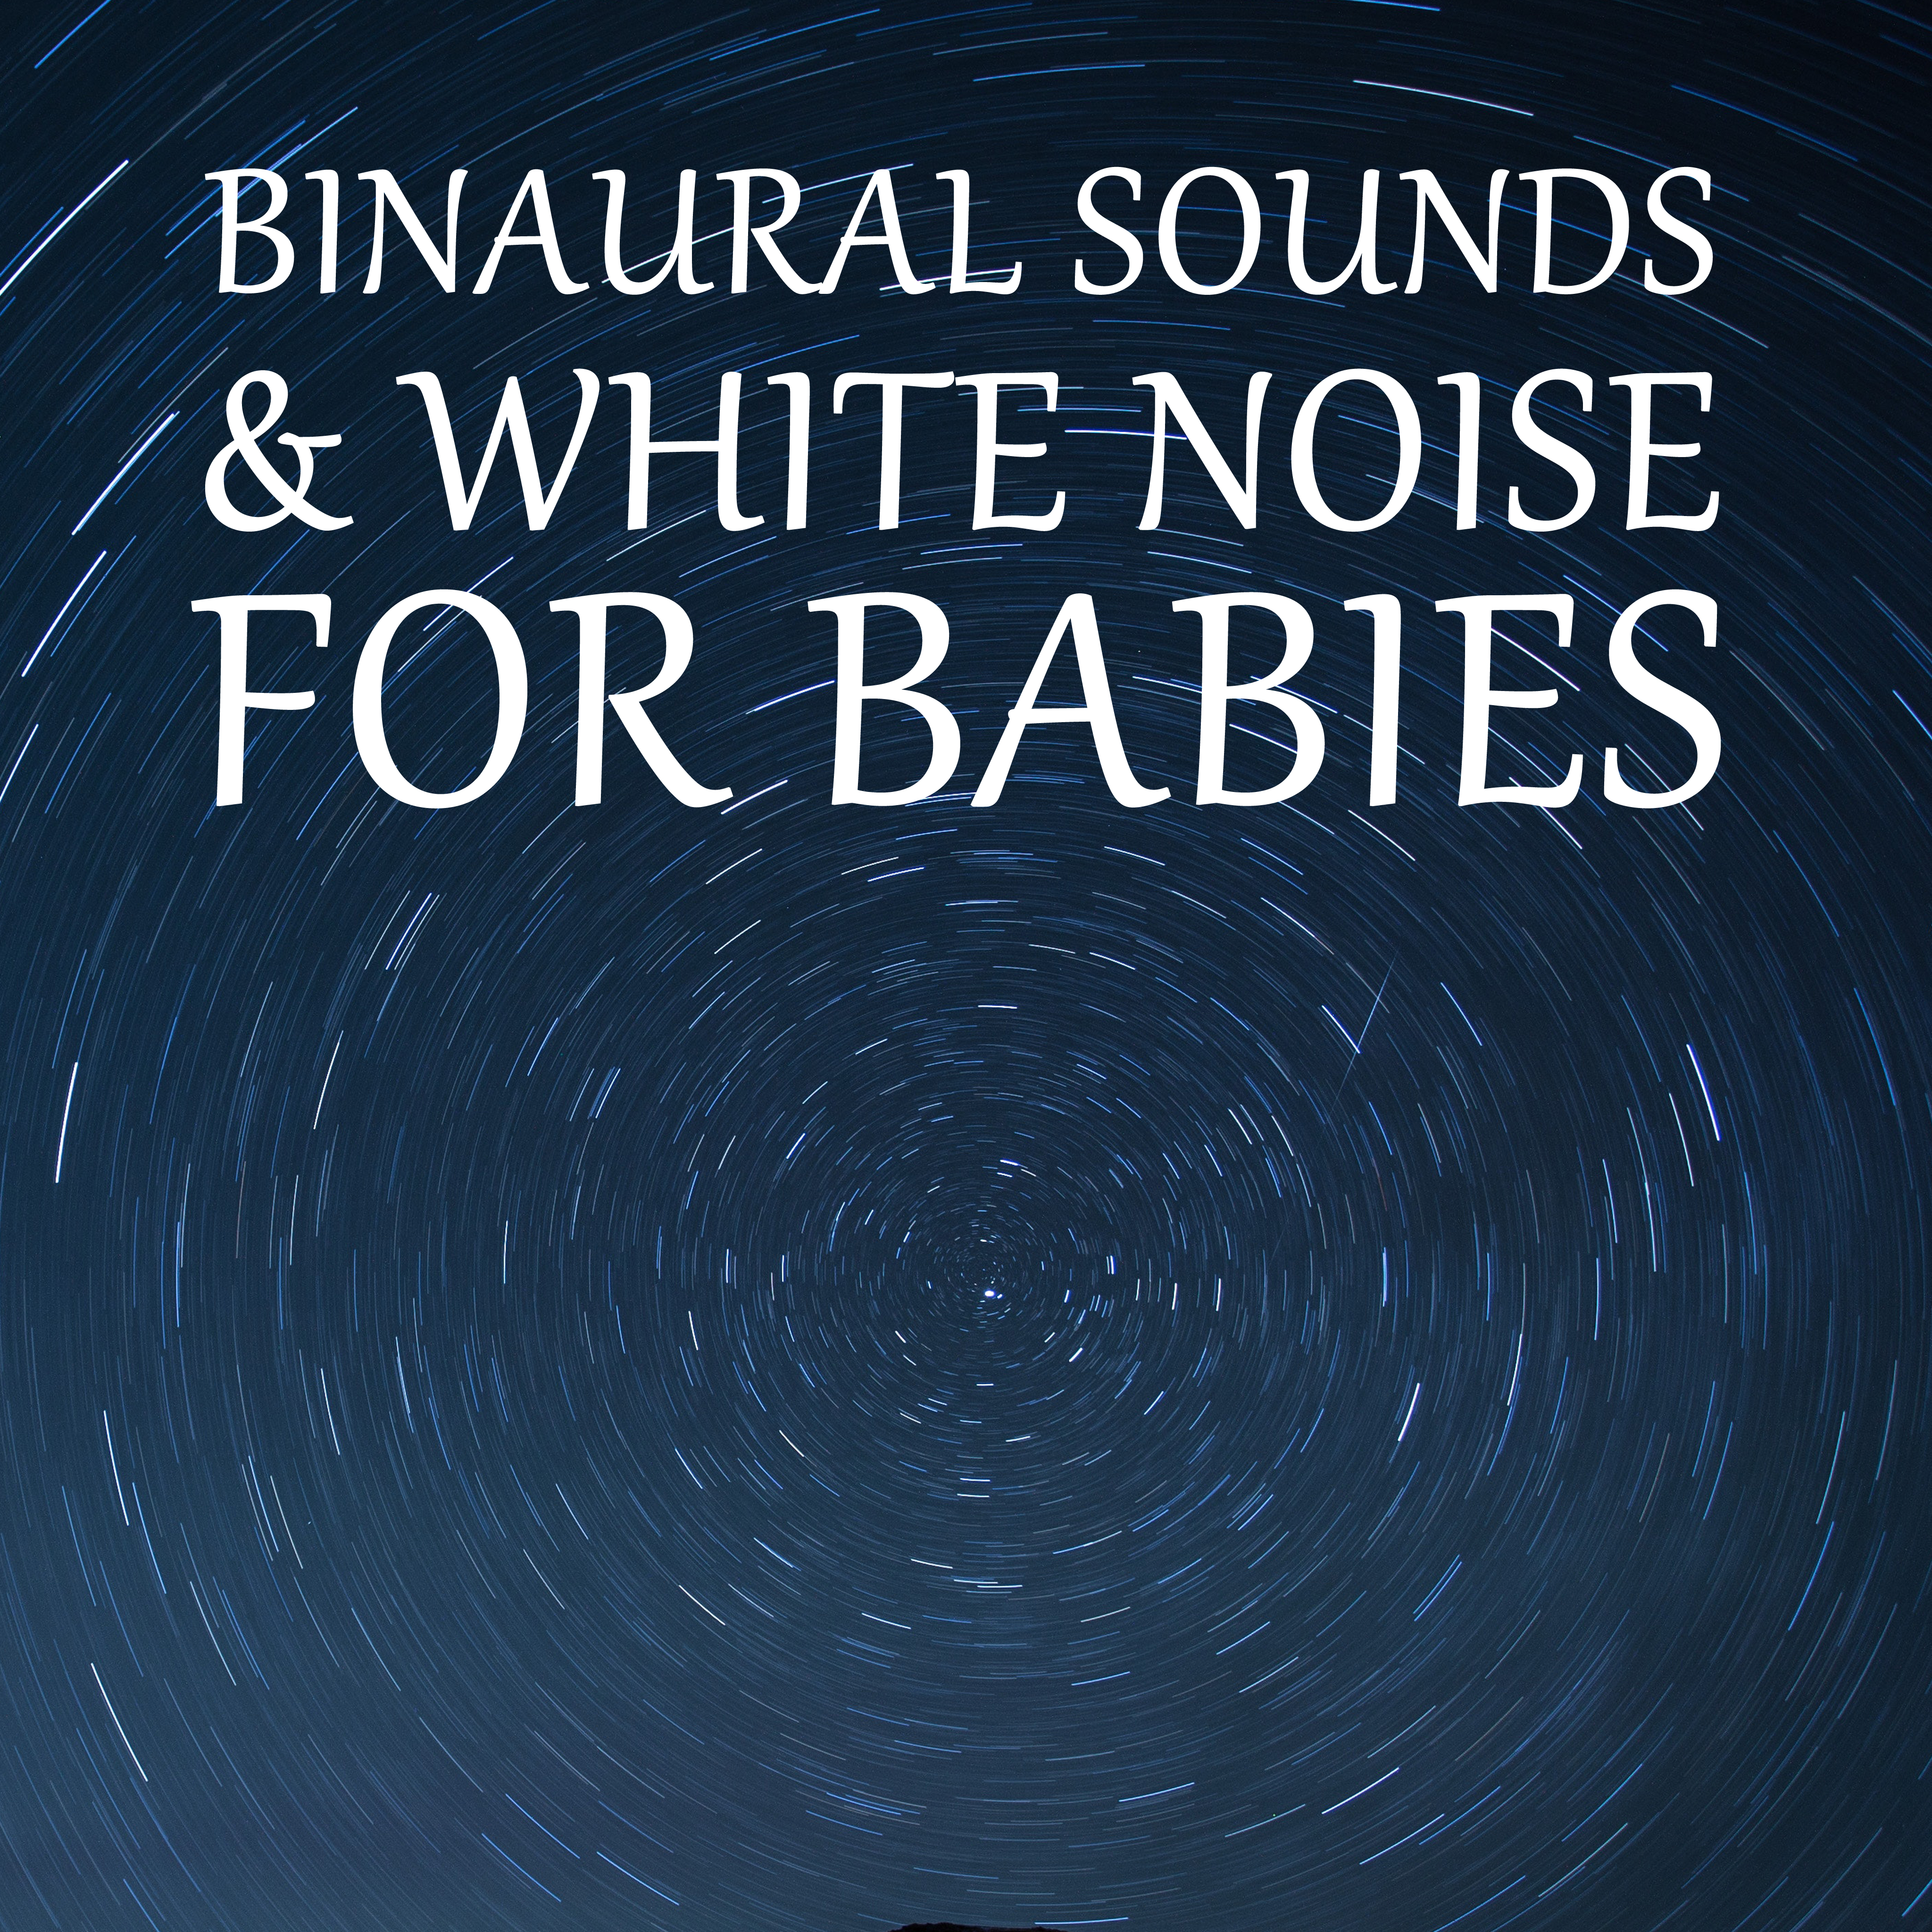 12 Binaural Sounds & White Noise for Babies